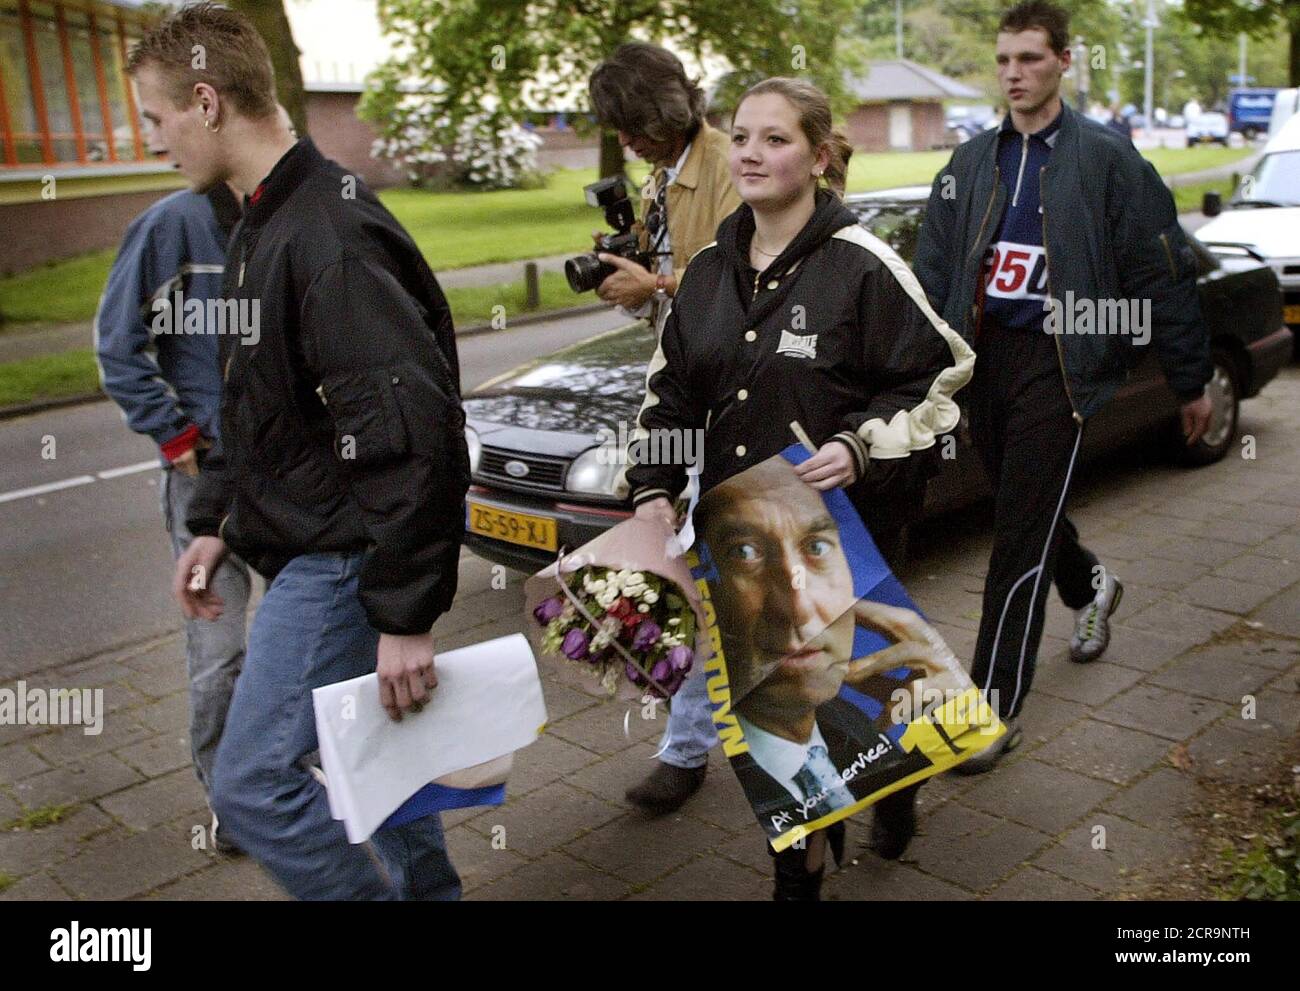 Supporters of Dutch politician Pim Fortuyn carry his campaign posters and  flowers after the maverick Dutch anti-immigration politician was shot dead  on May 6, 2002, nine days before a general election in